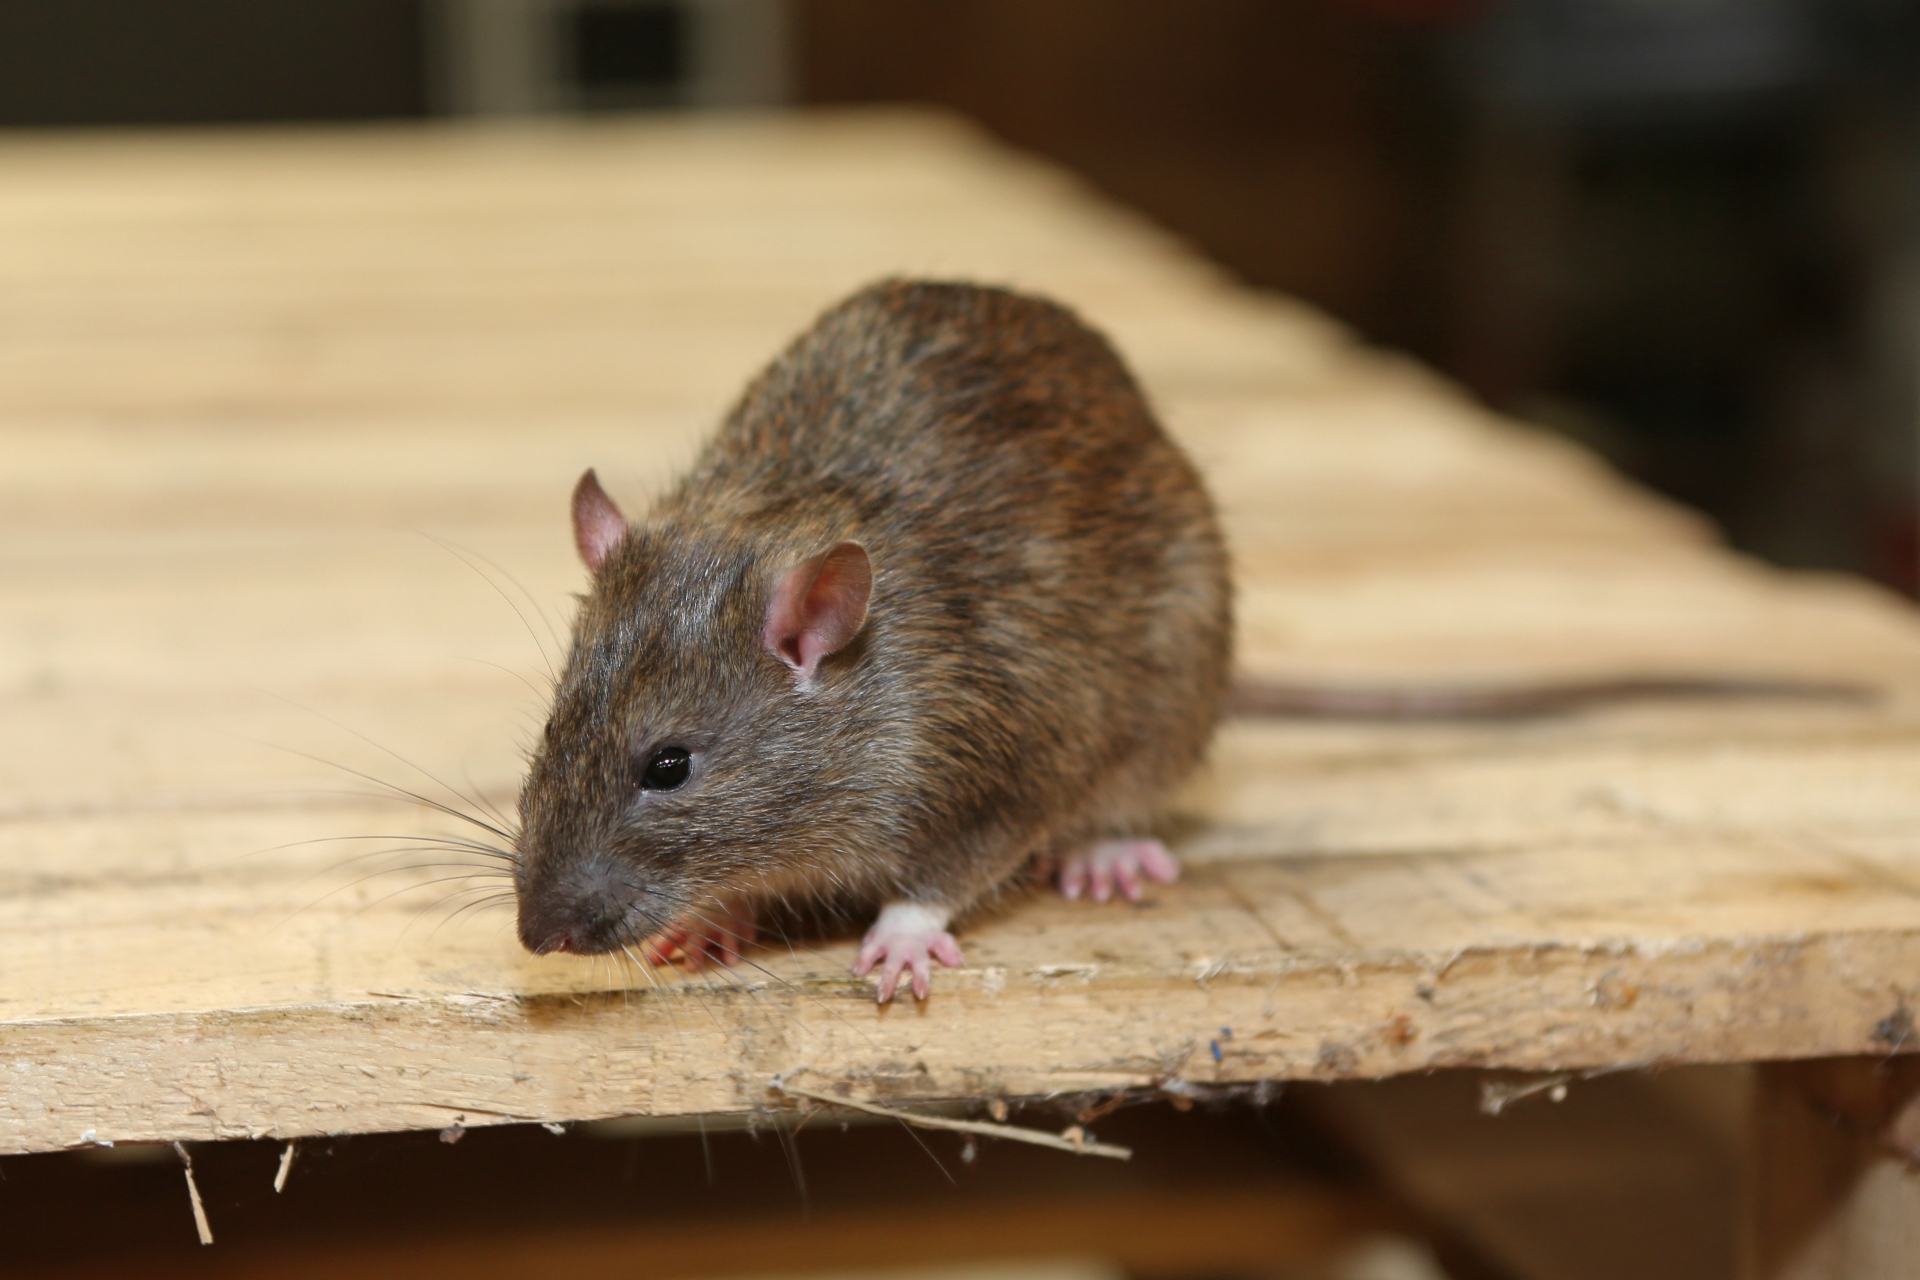 Rat extermination, Pest Control in Bayswater, W2. Call Now 020 8166 9746